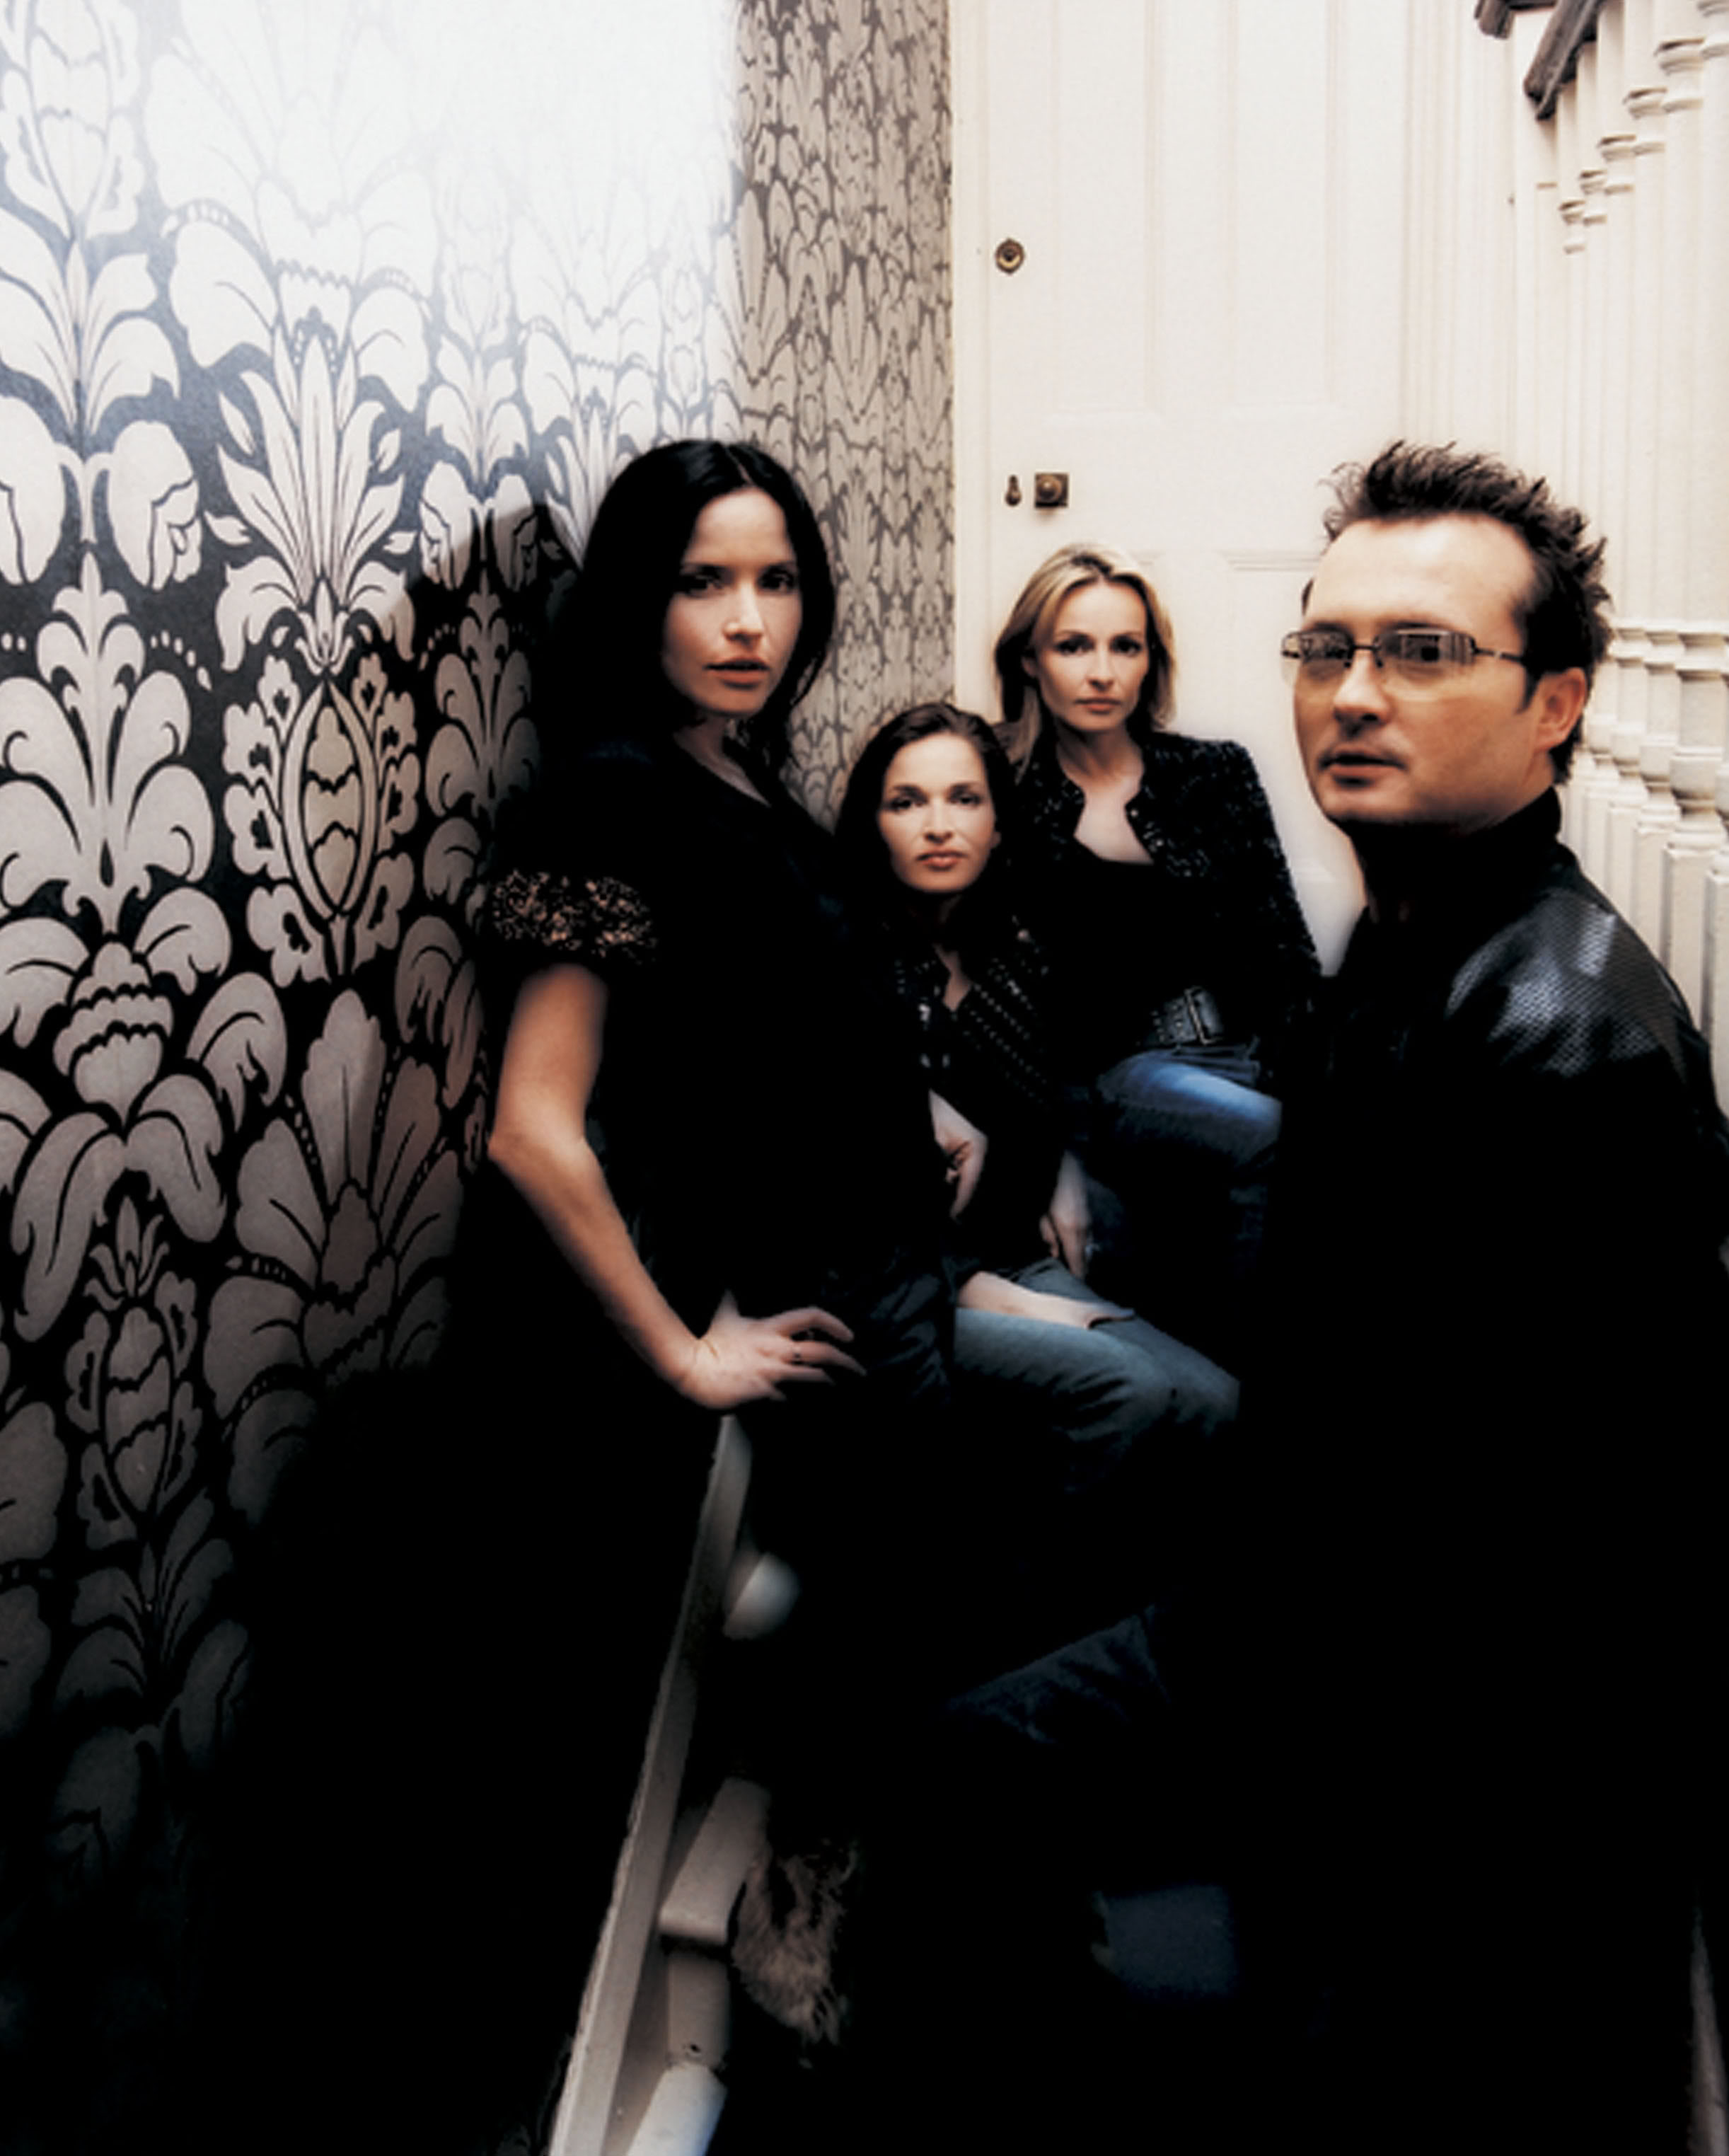 Best The Corrs Wallpaper Sisters Young